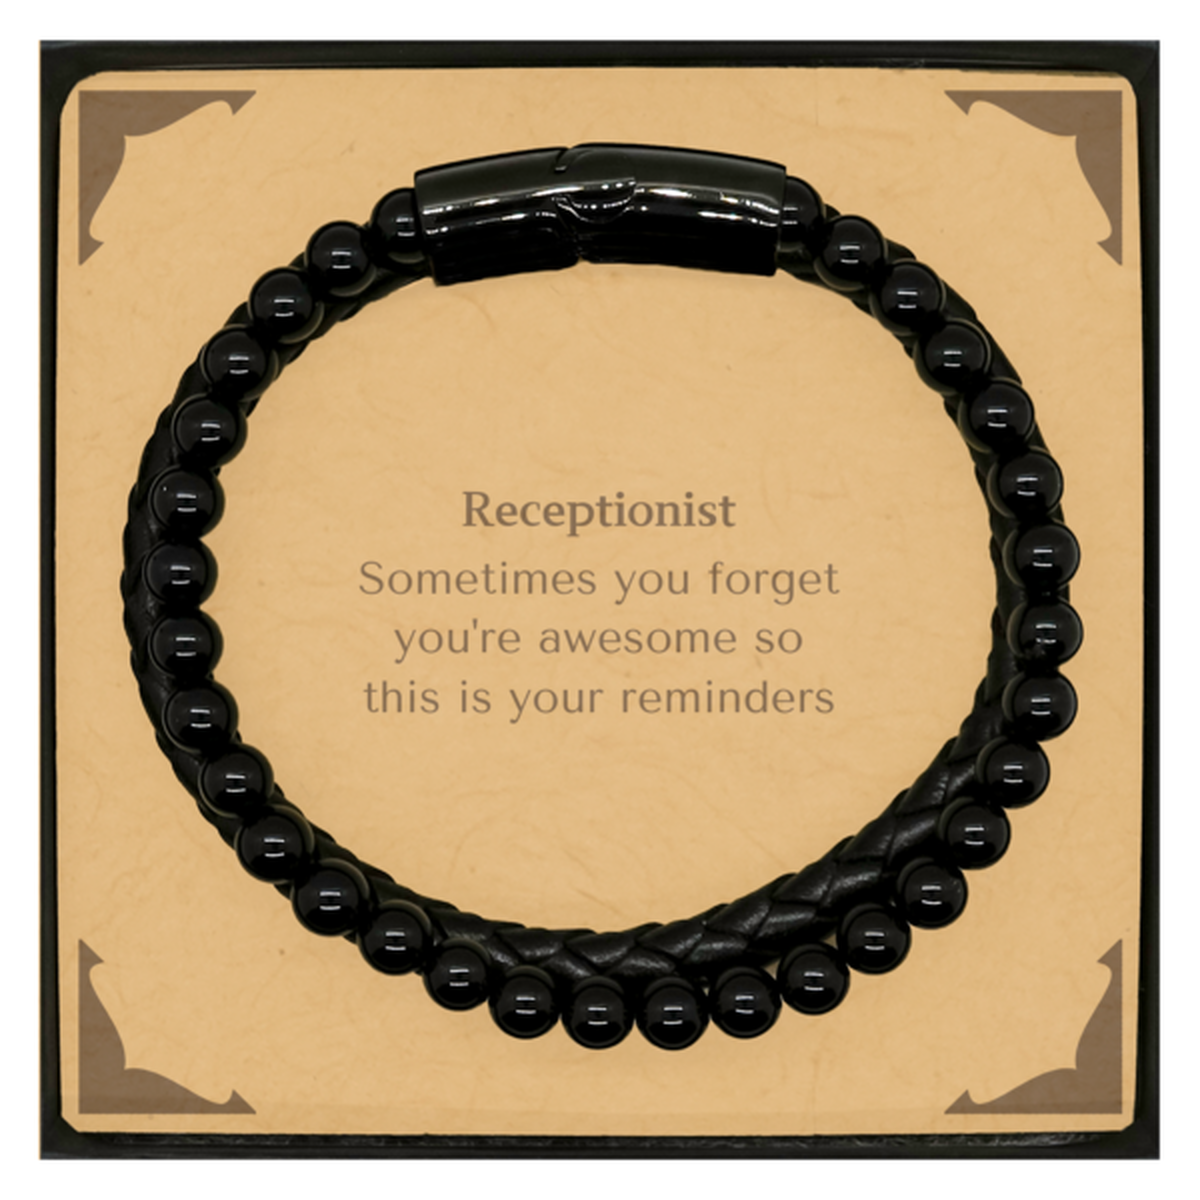 Sentimental Receptionist Stone Leather Bracelets, Receptionist Sometimes you forget you're awesome so this is your reminders, Graduation Christmas Birthday Gifts for Receptionist, Men, Women, Coworkers